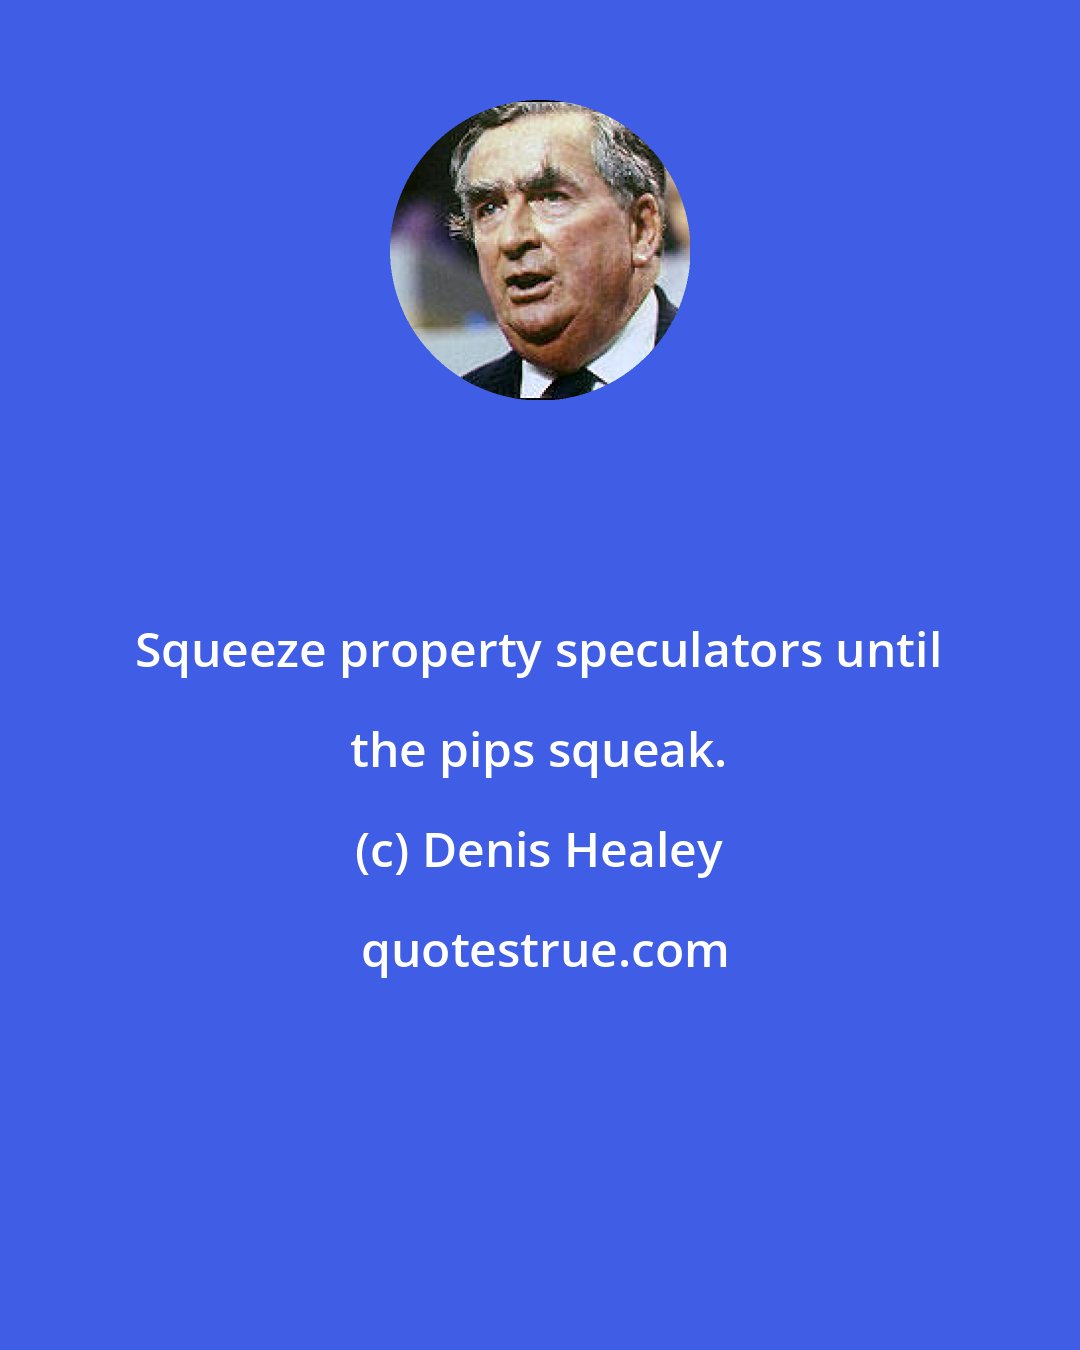 Denis Healey: Squeeze property speculators until the pips squeak.